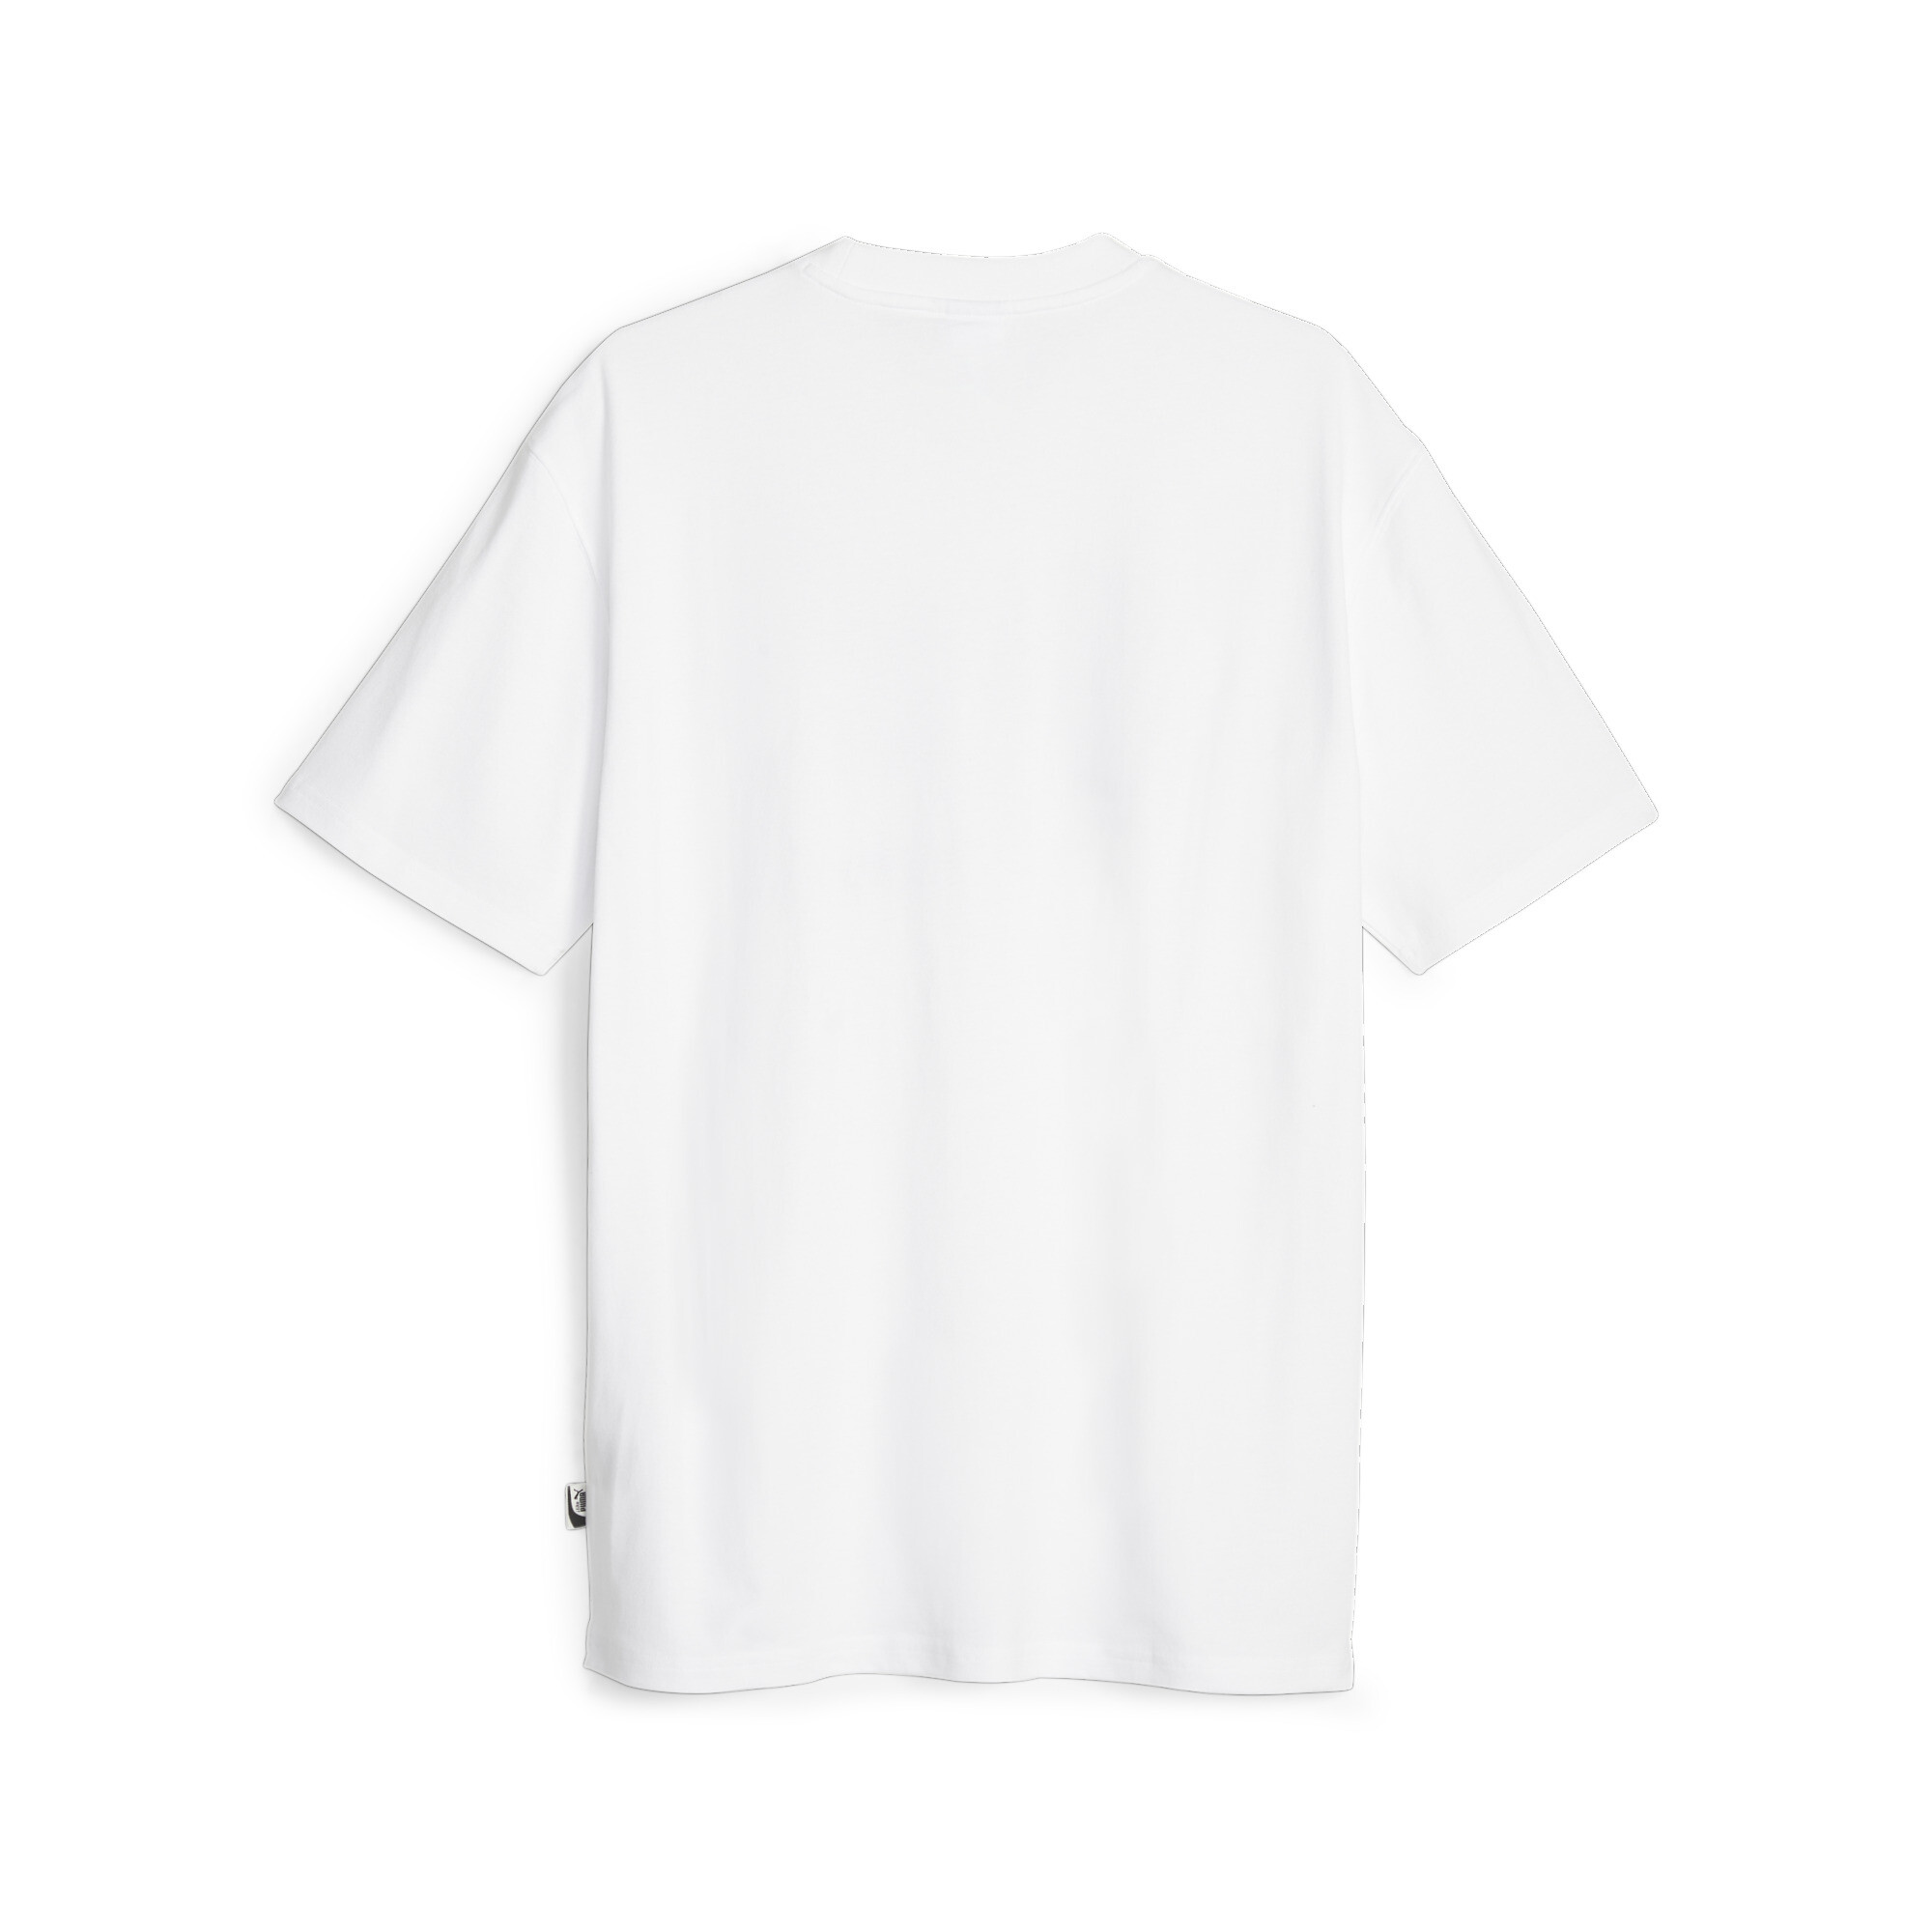 Men's PUMA The NeverWorn II T-Shirt In White, Size Large